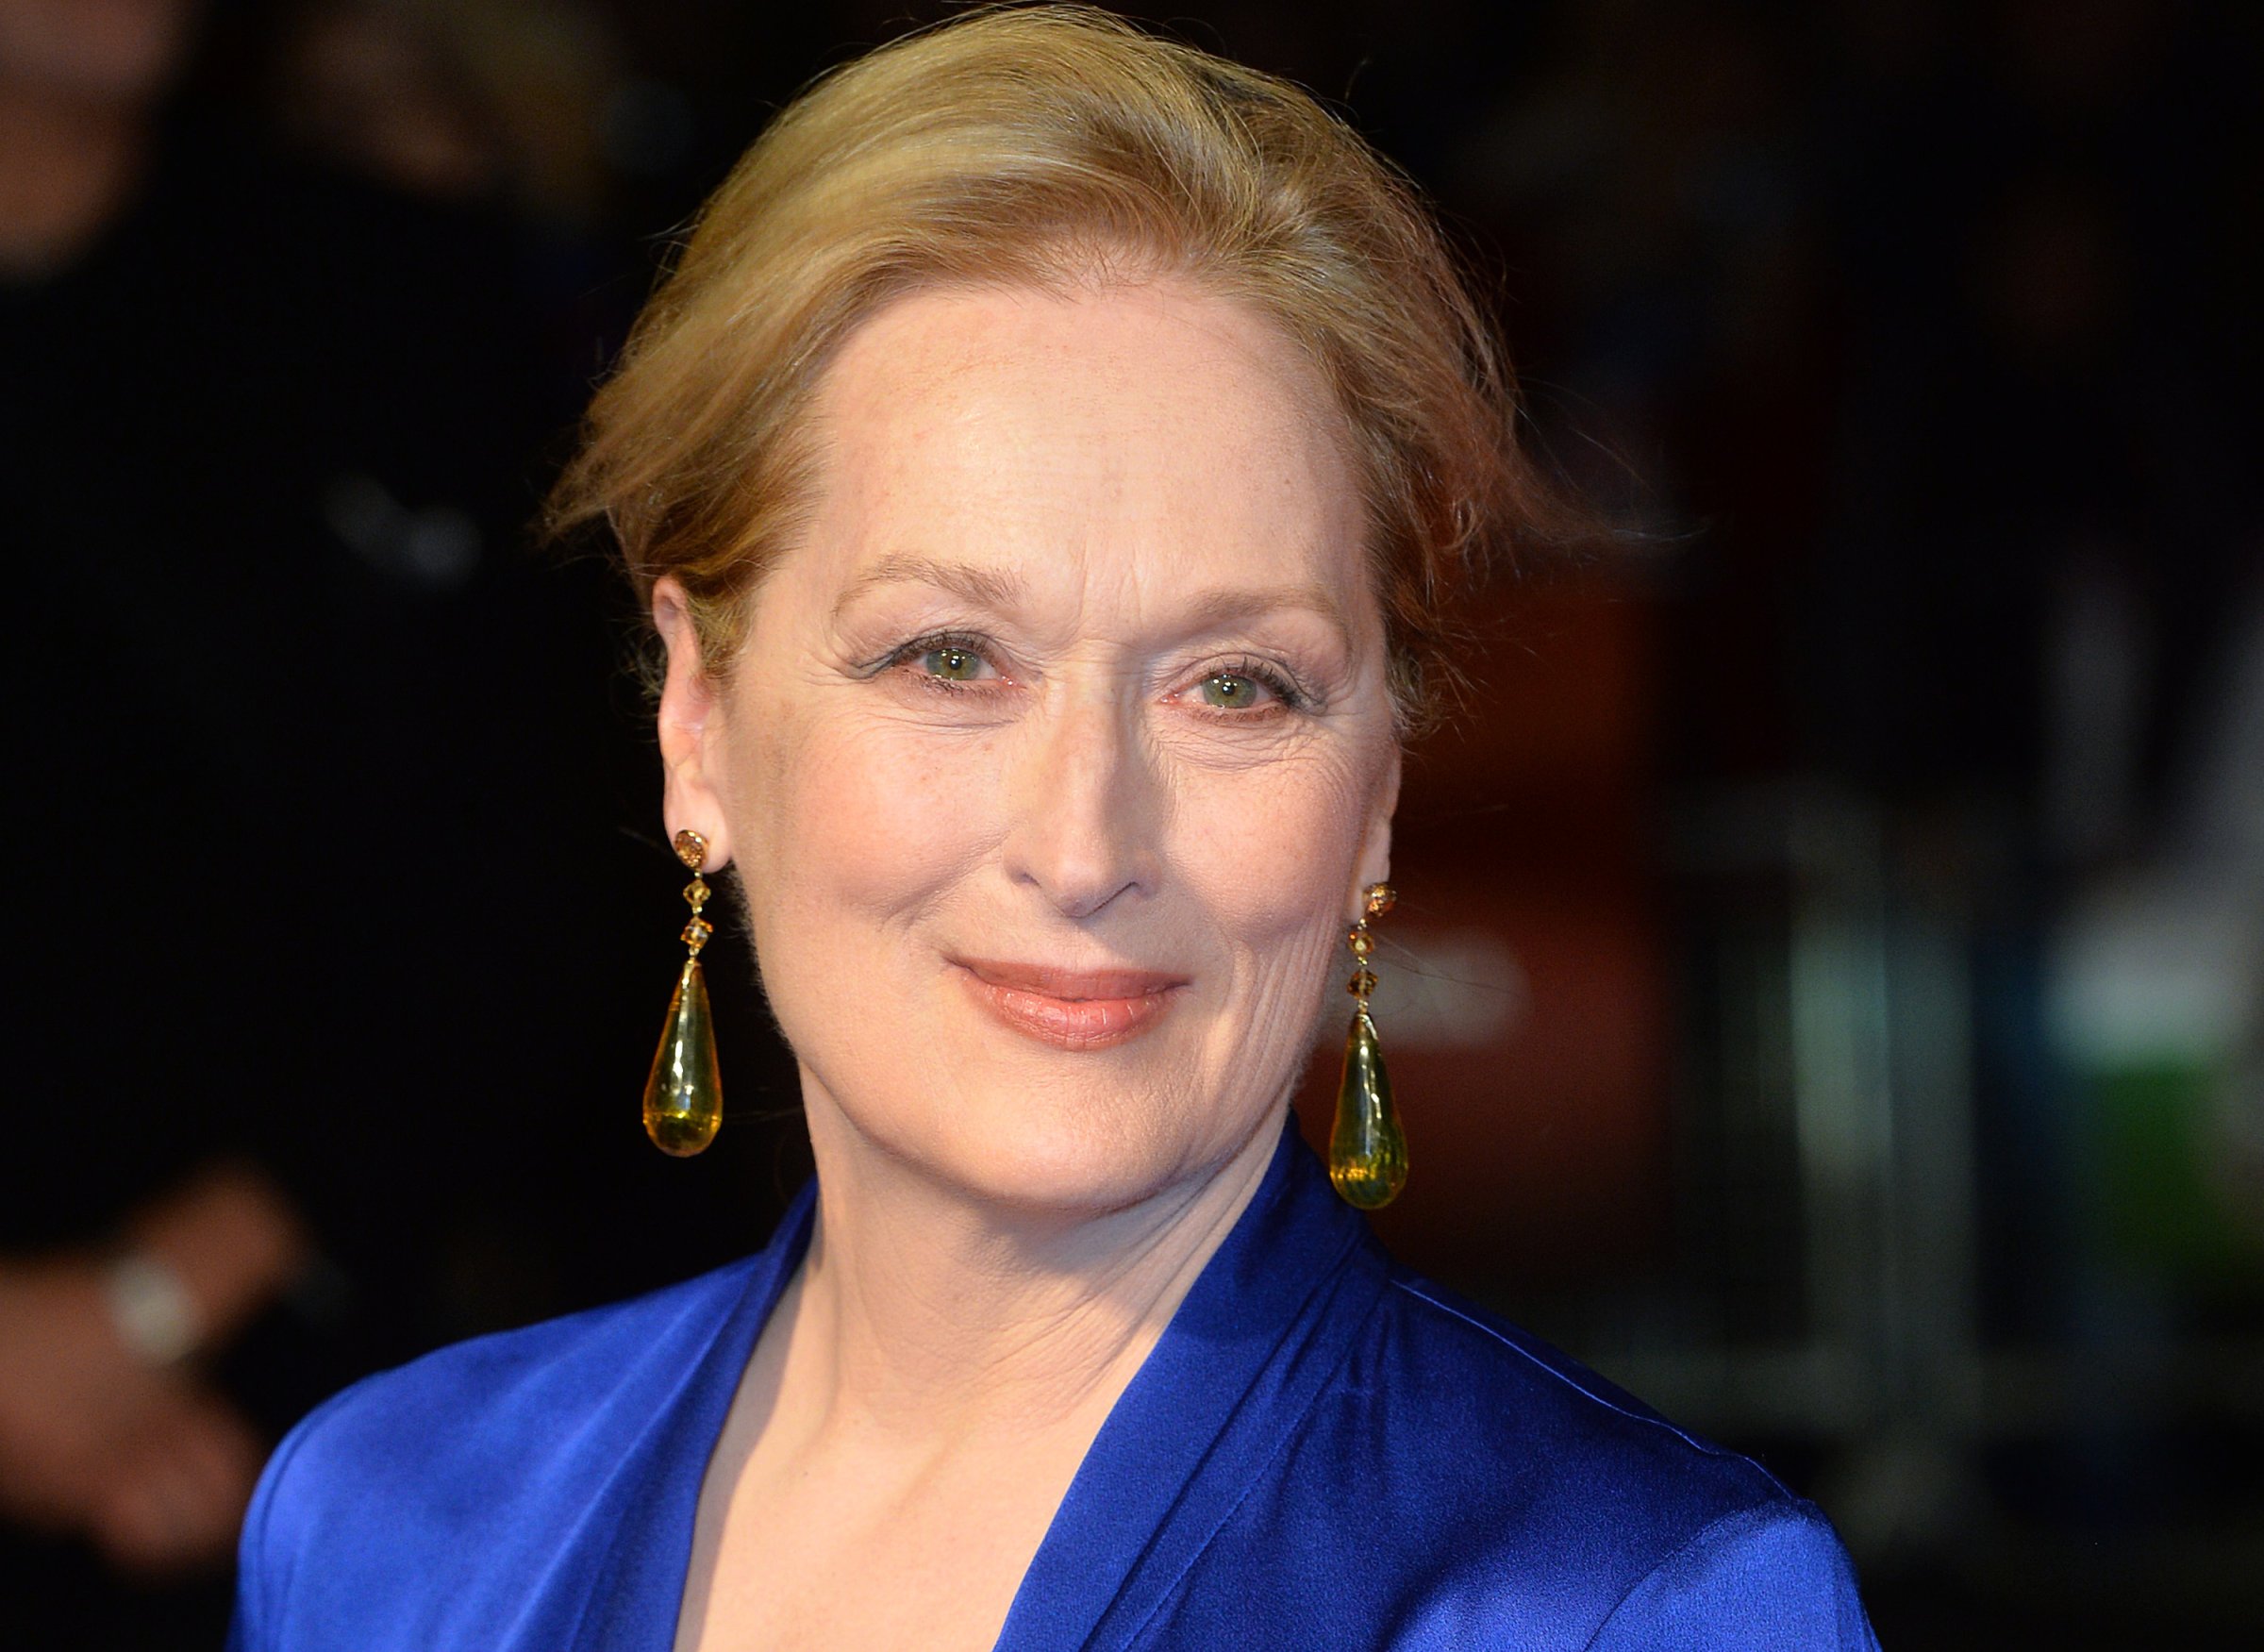 Meryl Streep at the screening of 'Suffragette' on the opening night of the BFI London Film Festival on Oct. 7, 2015.